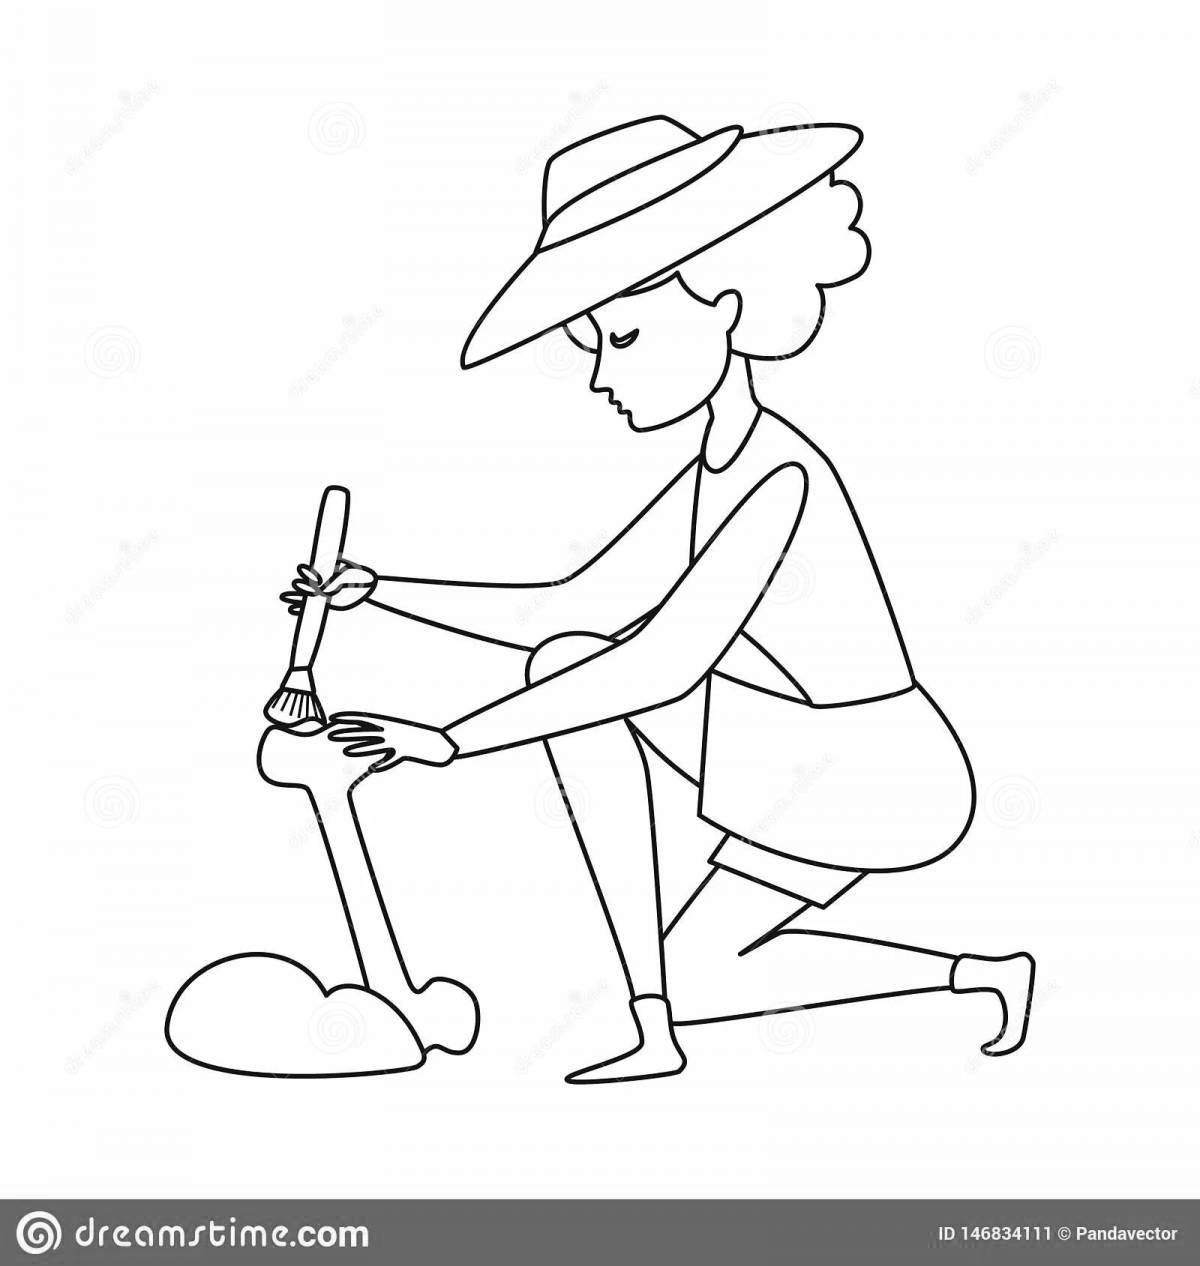 Coloring book brave archaeologist